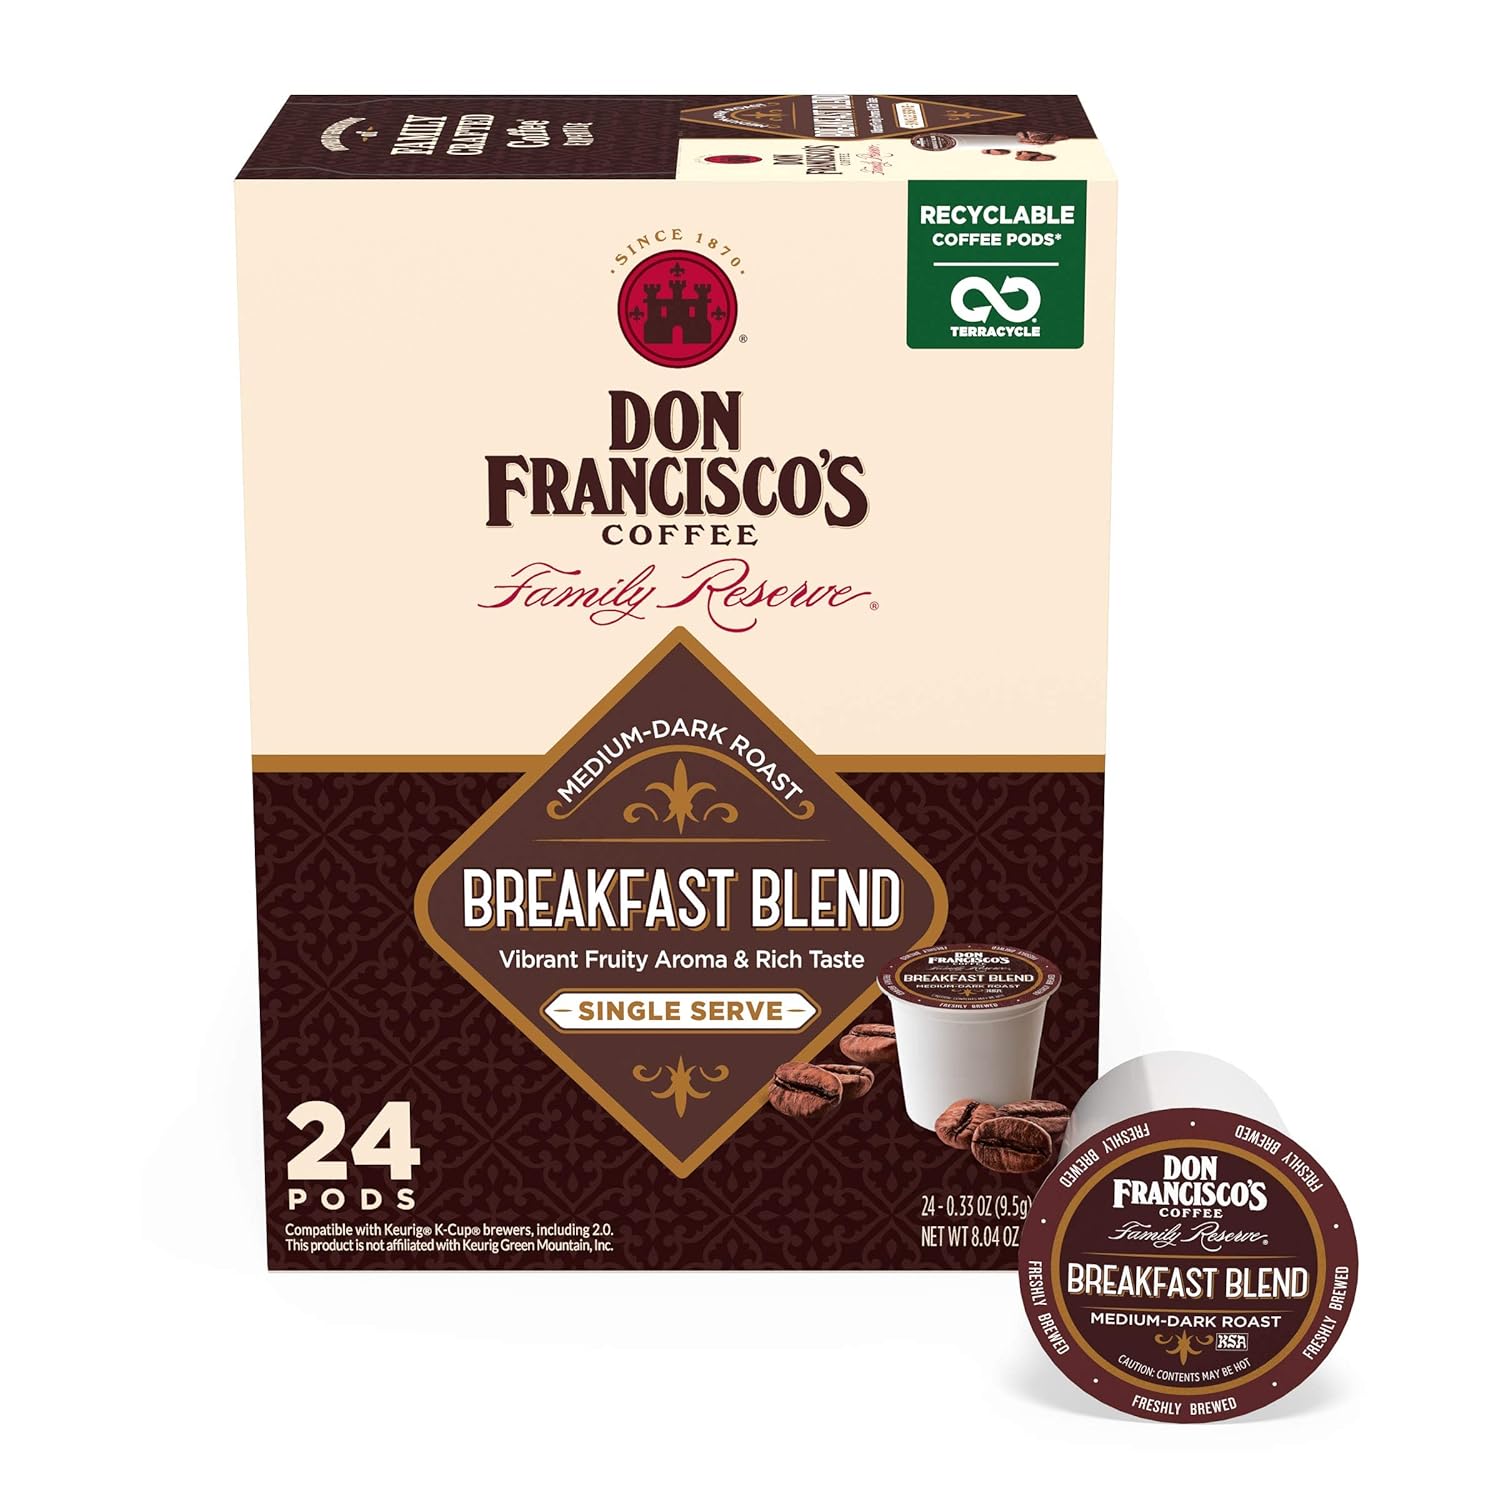 Don Francisco's Breakfast Blend Medium-Dark Roast Coffee Pods - 24 Count - Recyclable Single-Serve Coffee Pods, Compatible with your K- Cup Keurig Coffee Maker